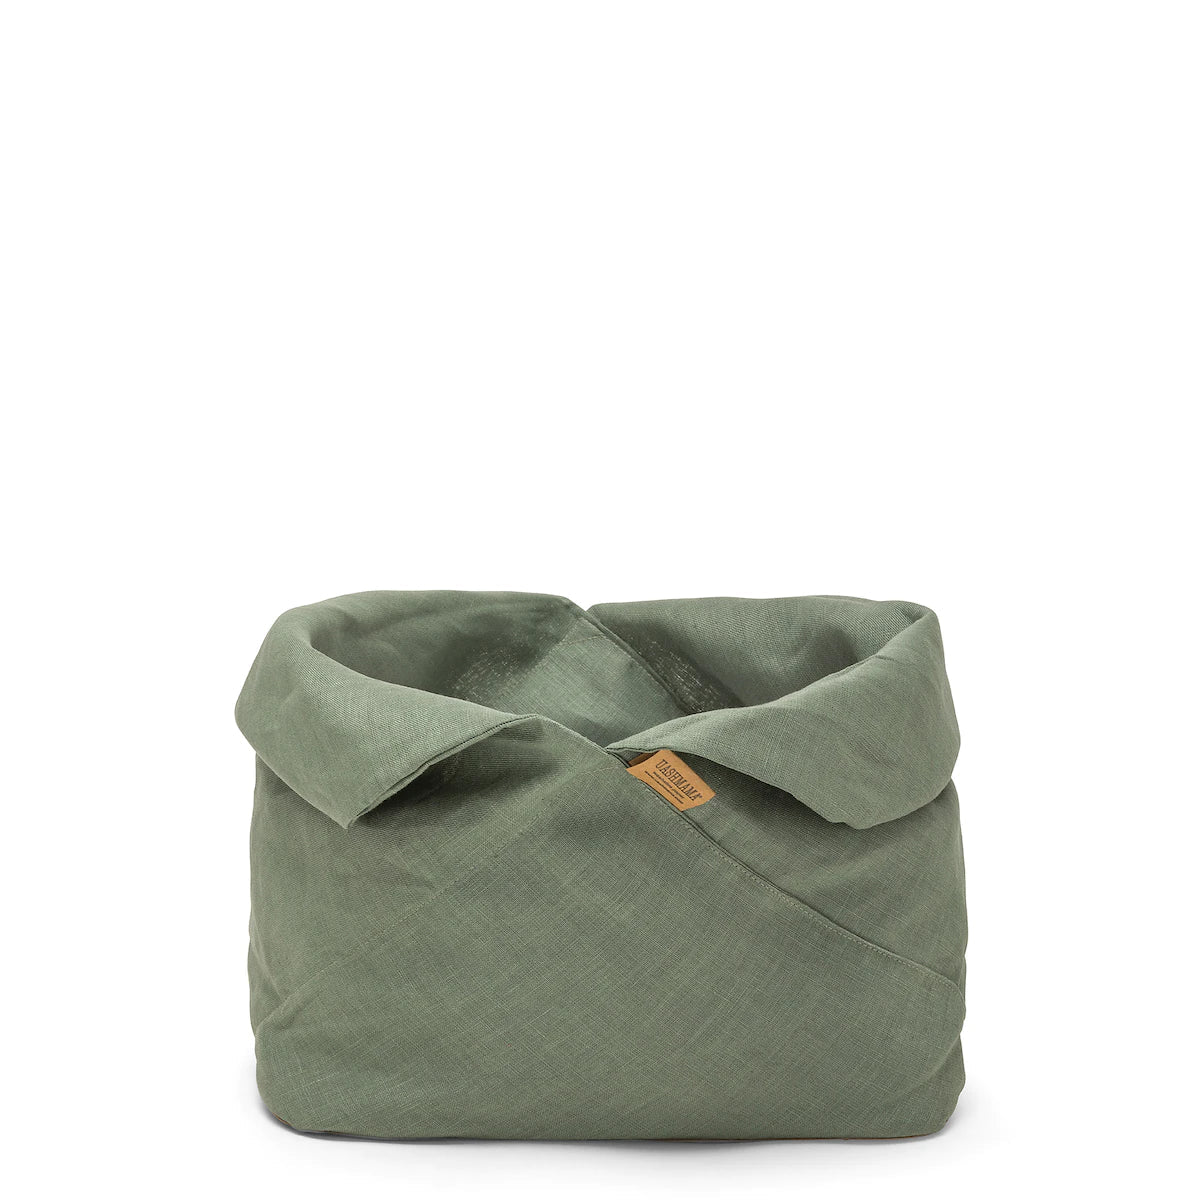 A large green bread bag is shown with the top rolled down.